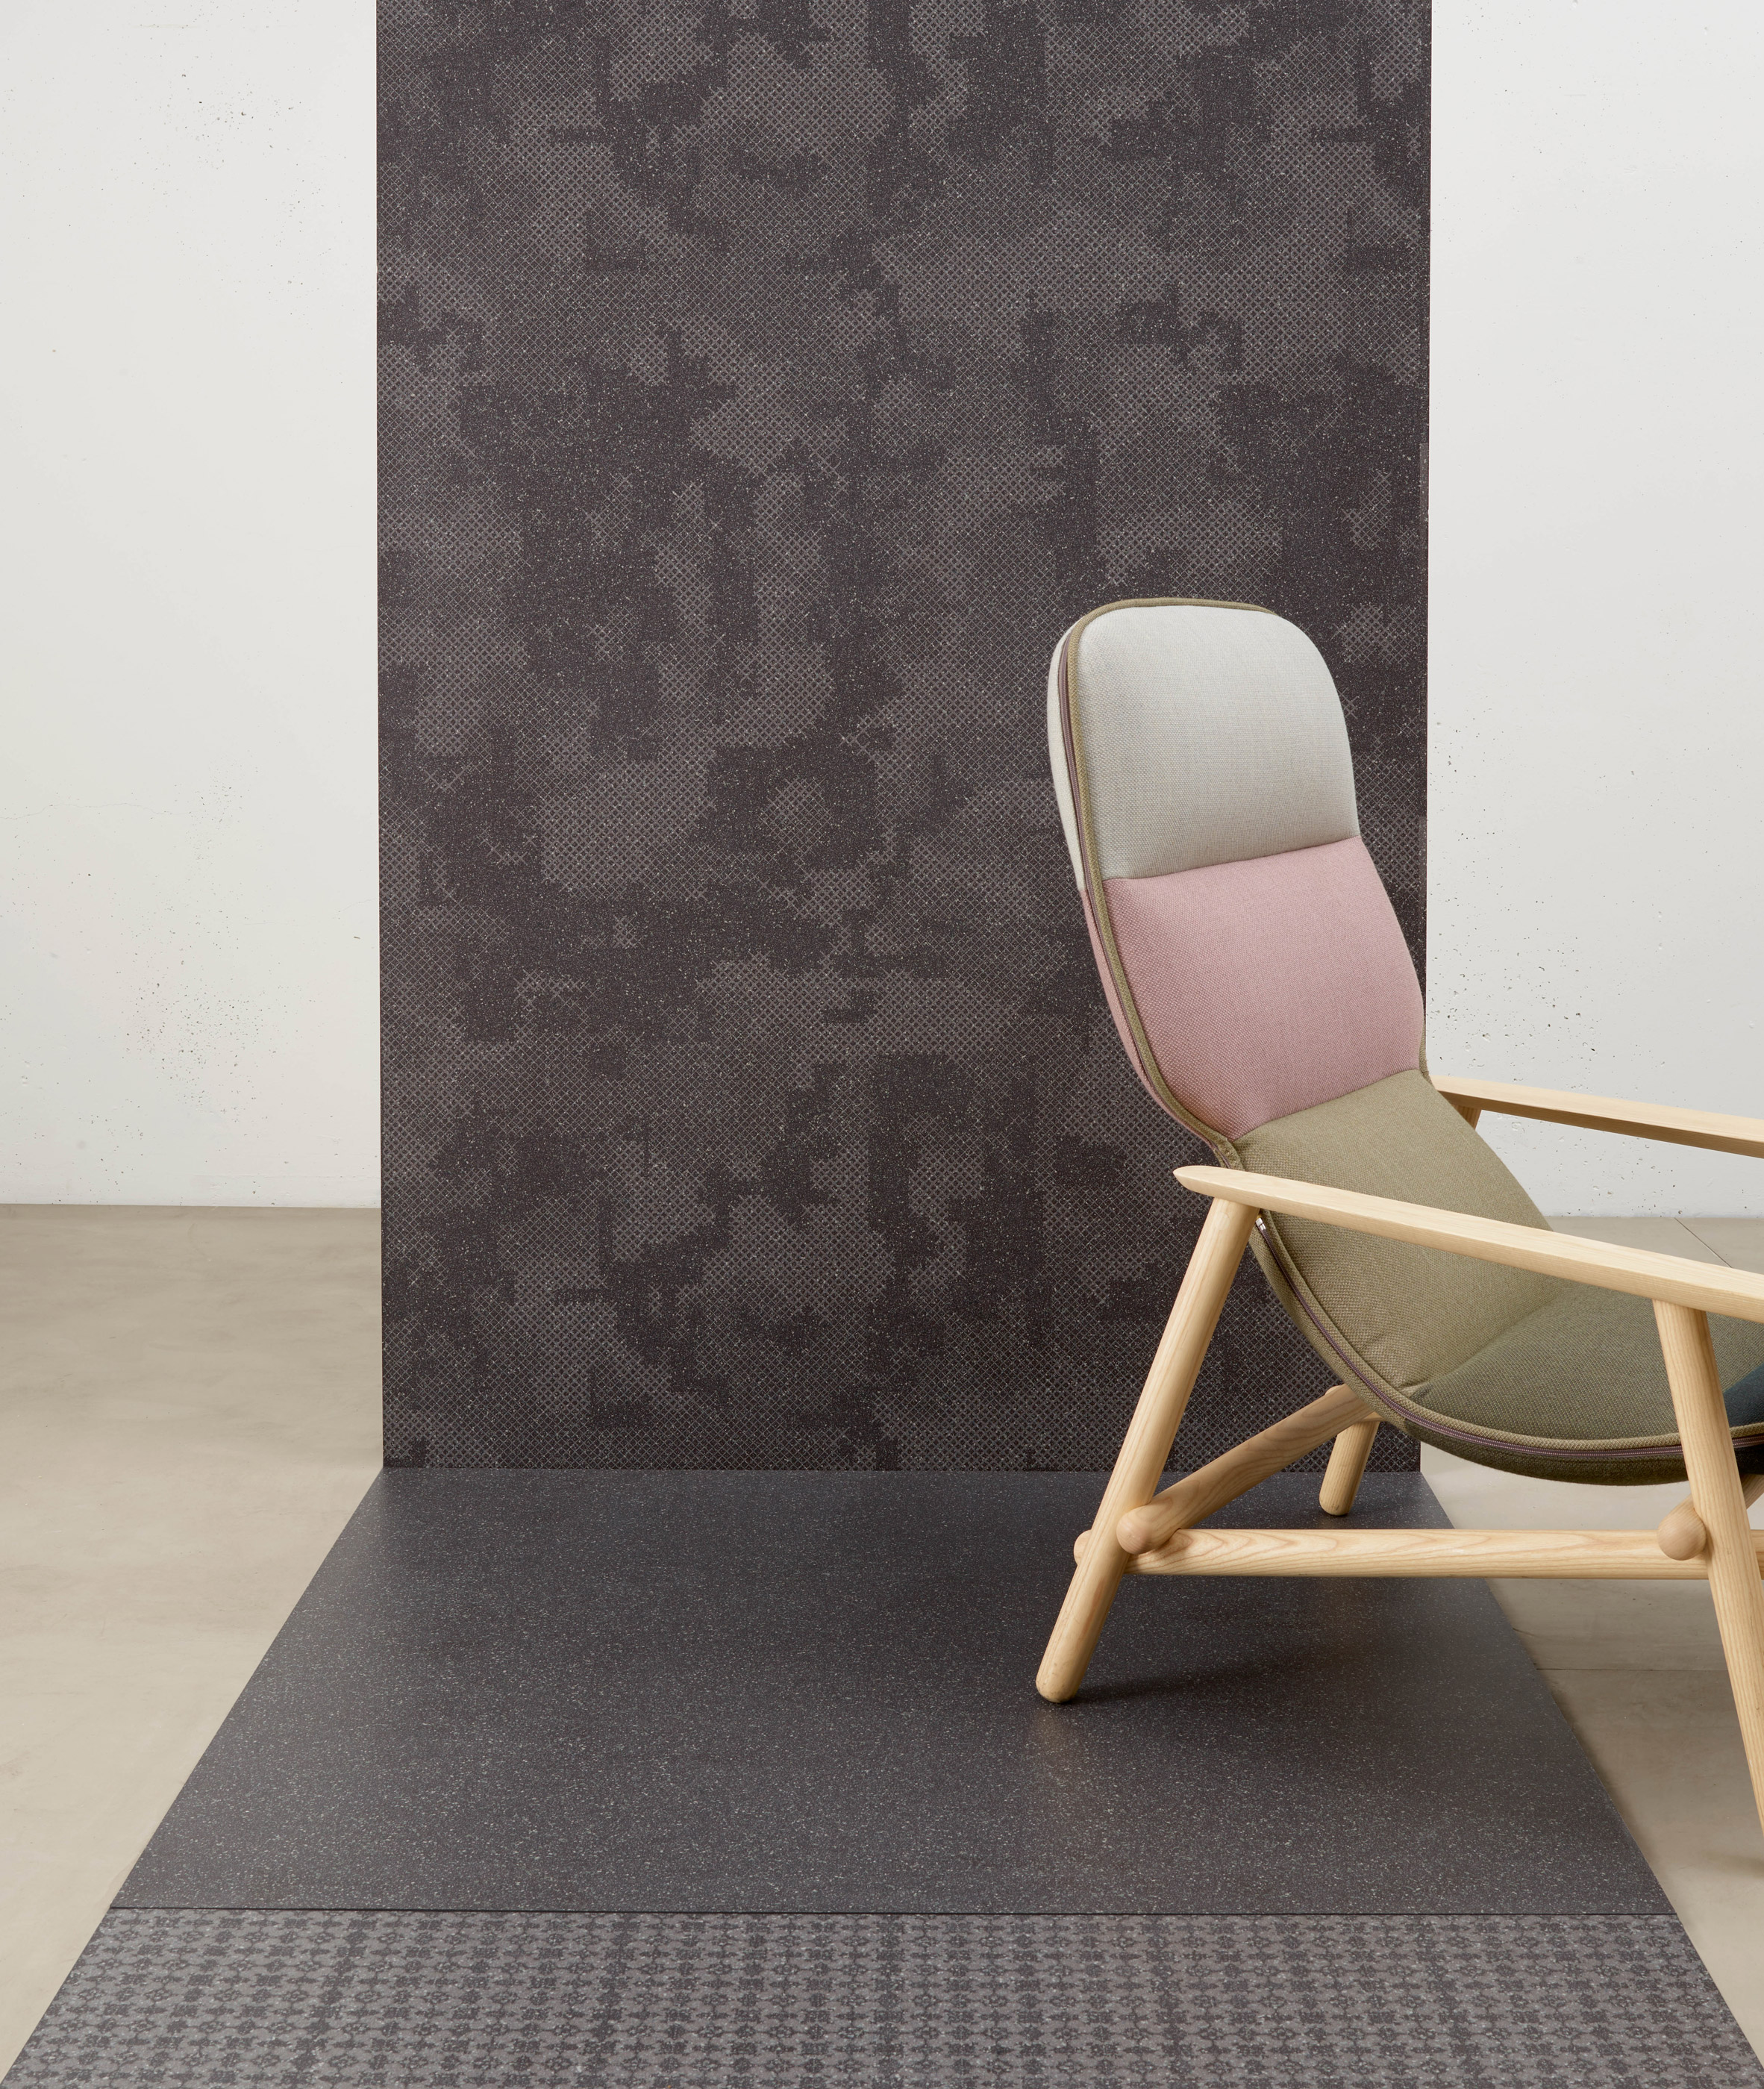 Mutina releases new personalised ceramic slab collection by Patricia Urquiola